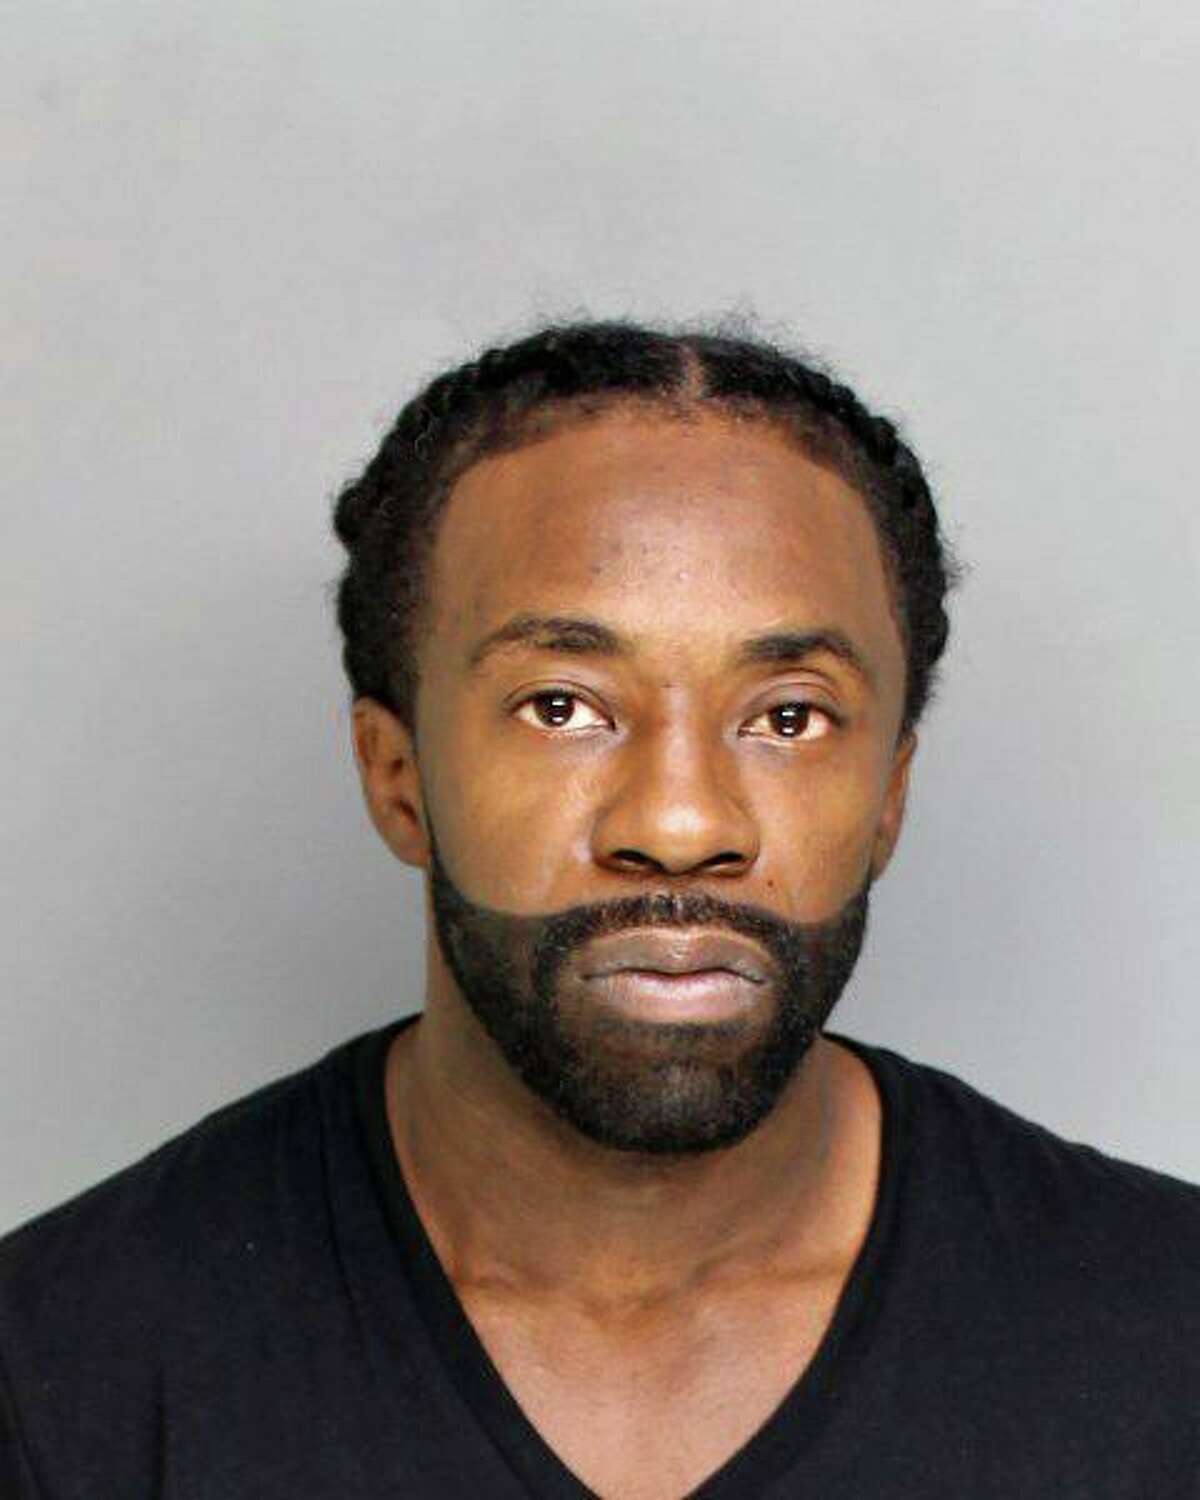 Eugene Brown, 35, of Fremont Street in Bridgeport, Conn., has been charged in connection with the homicide of Anthony McKinstry, 30, on June 24, 2019. He was arrested by Bridgeport police on Sept. 17, 2019.